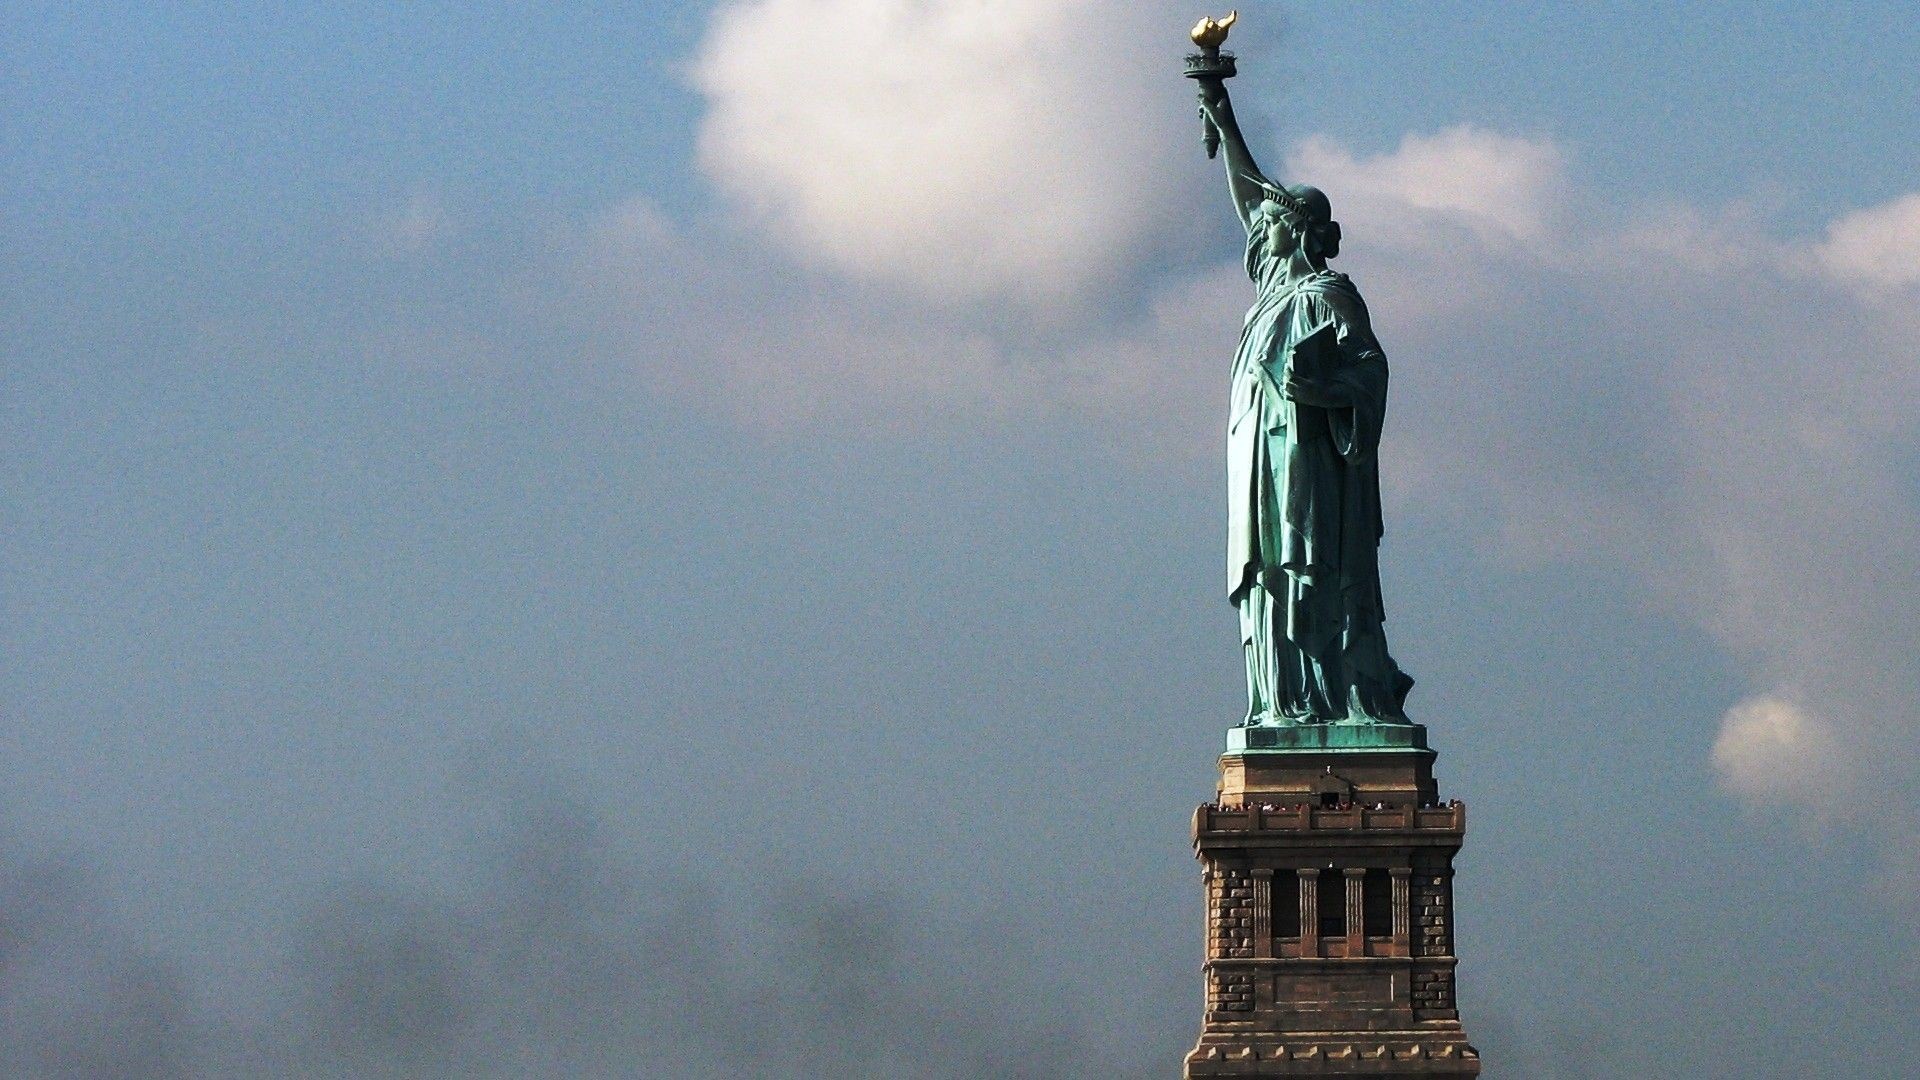 1920x1080 Statue of Liberty images statue of liberty HD wallpaper and